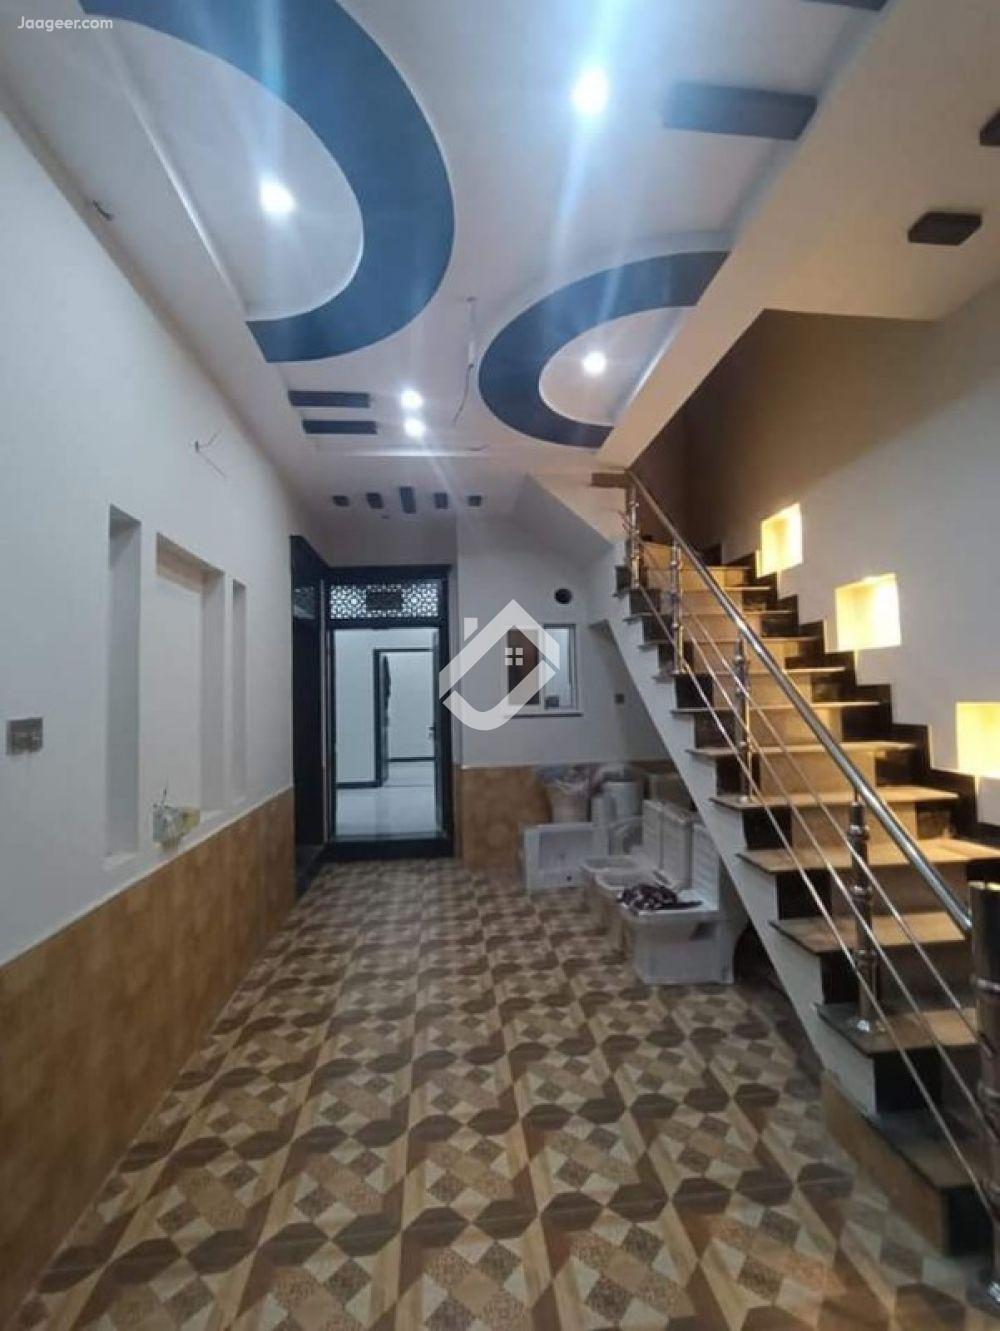 View  5.25 Marla Double Storey House For Sale In Lahore Medical Housing Society in Lahore Medical Housing Society, Lahore